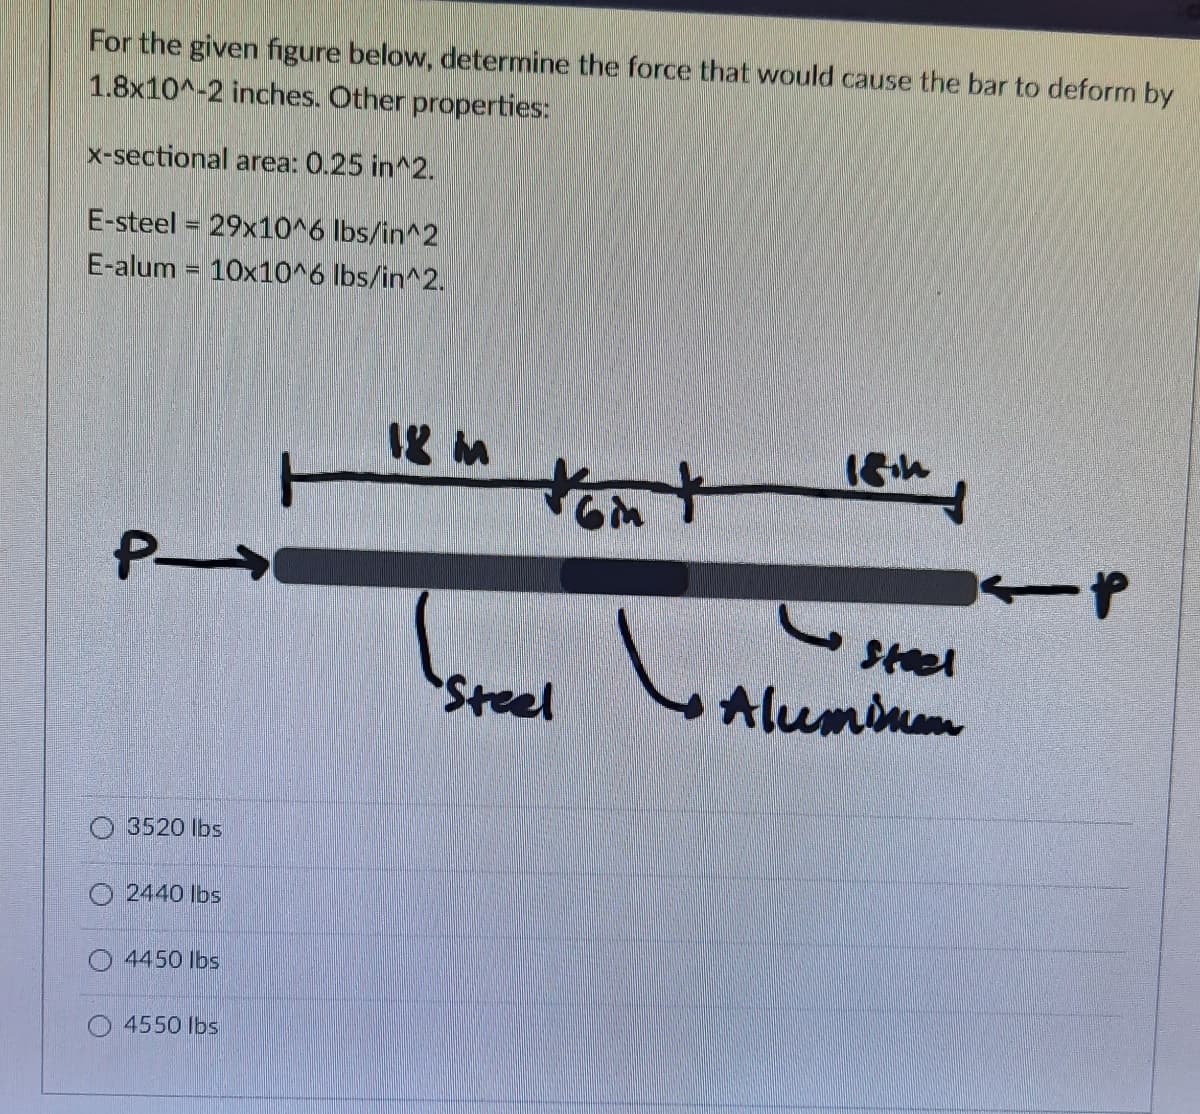 For the given figure below, determine the force that would cause the bar to deform by
1.8x10^-2 inches. Other properties:
x-sectional area: 0.25 in^2.
E-steel = 29x10^6 lbs/in^2
E-alum = 10x10^6 lbs/in^2.
tom
P
Steel
Steel
Aluminn
O 3520 lbs
O 2440 Ibs
4450 lbs
O 4550 Ibs
